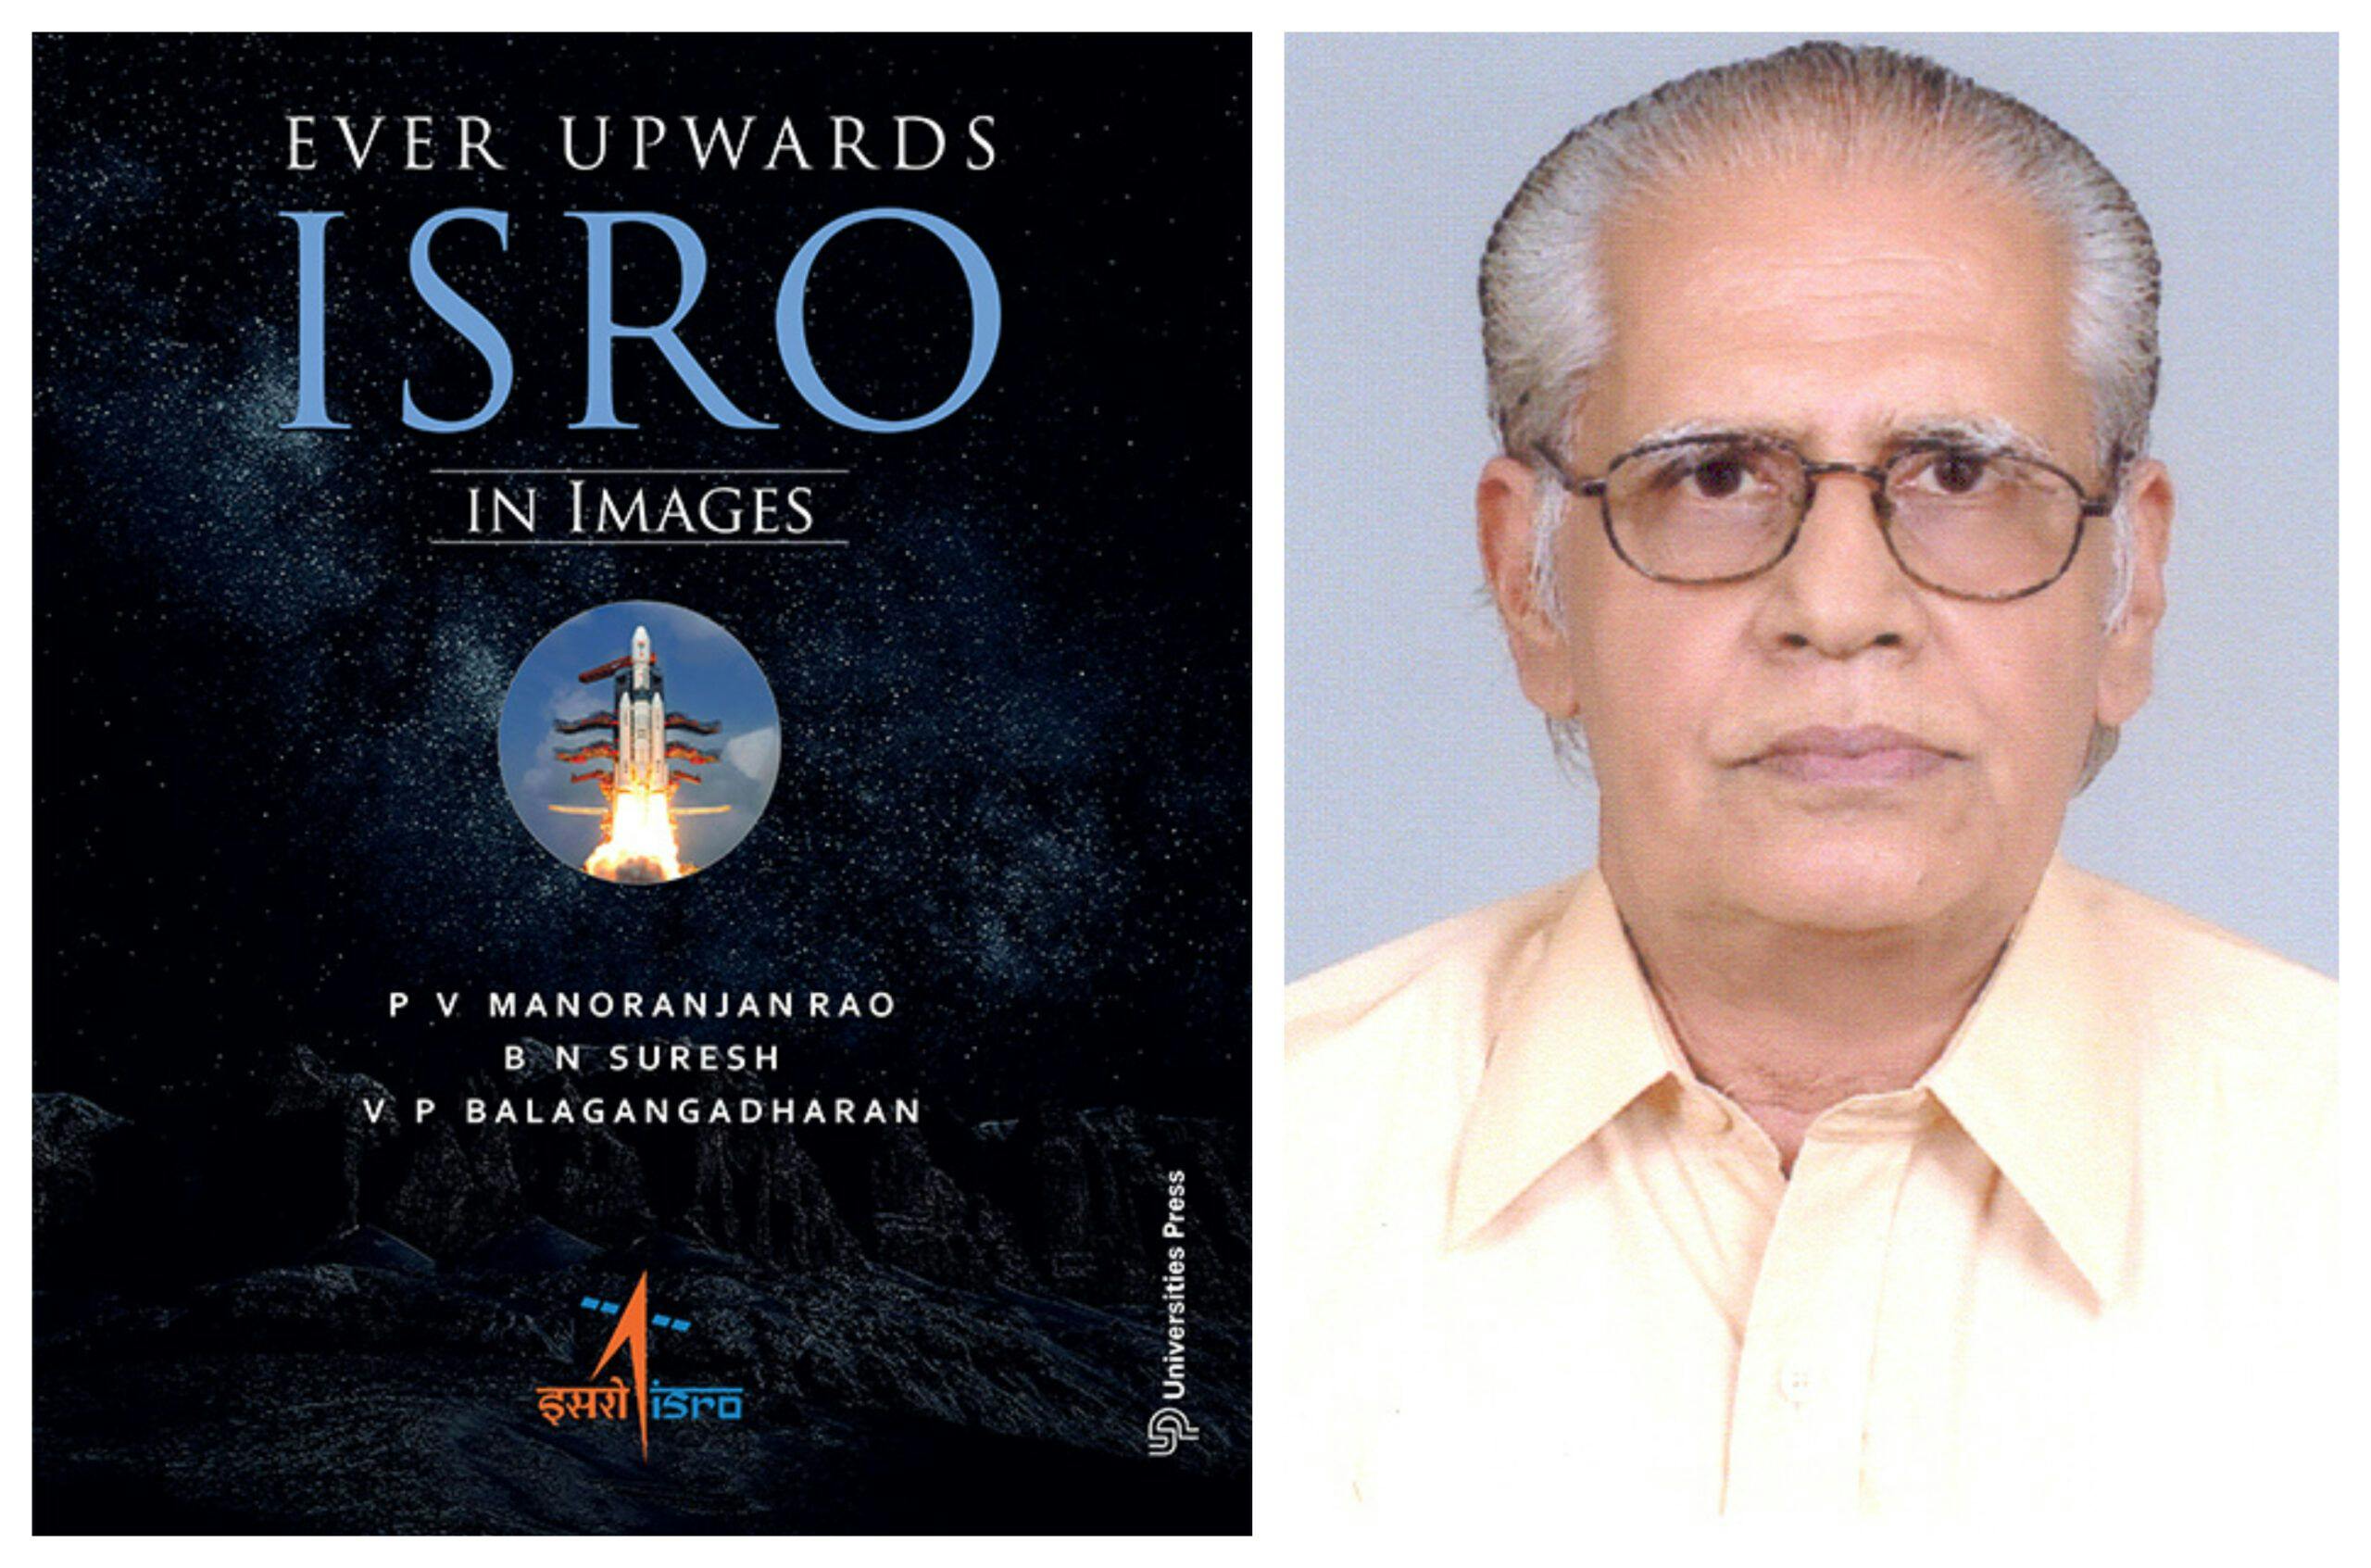 Cover of the book and co-author P V Manoranjan Rao